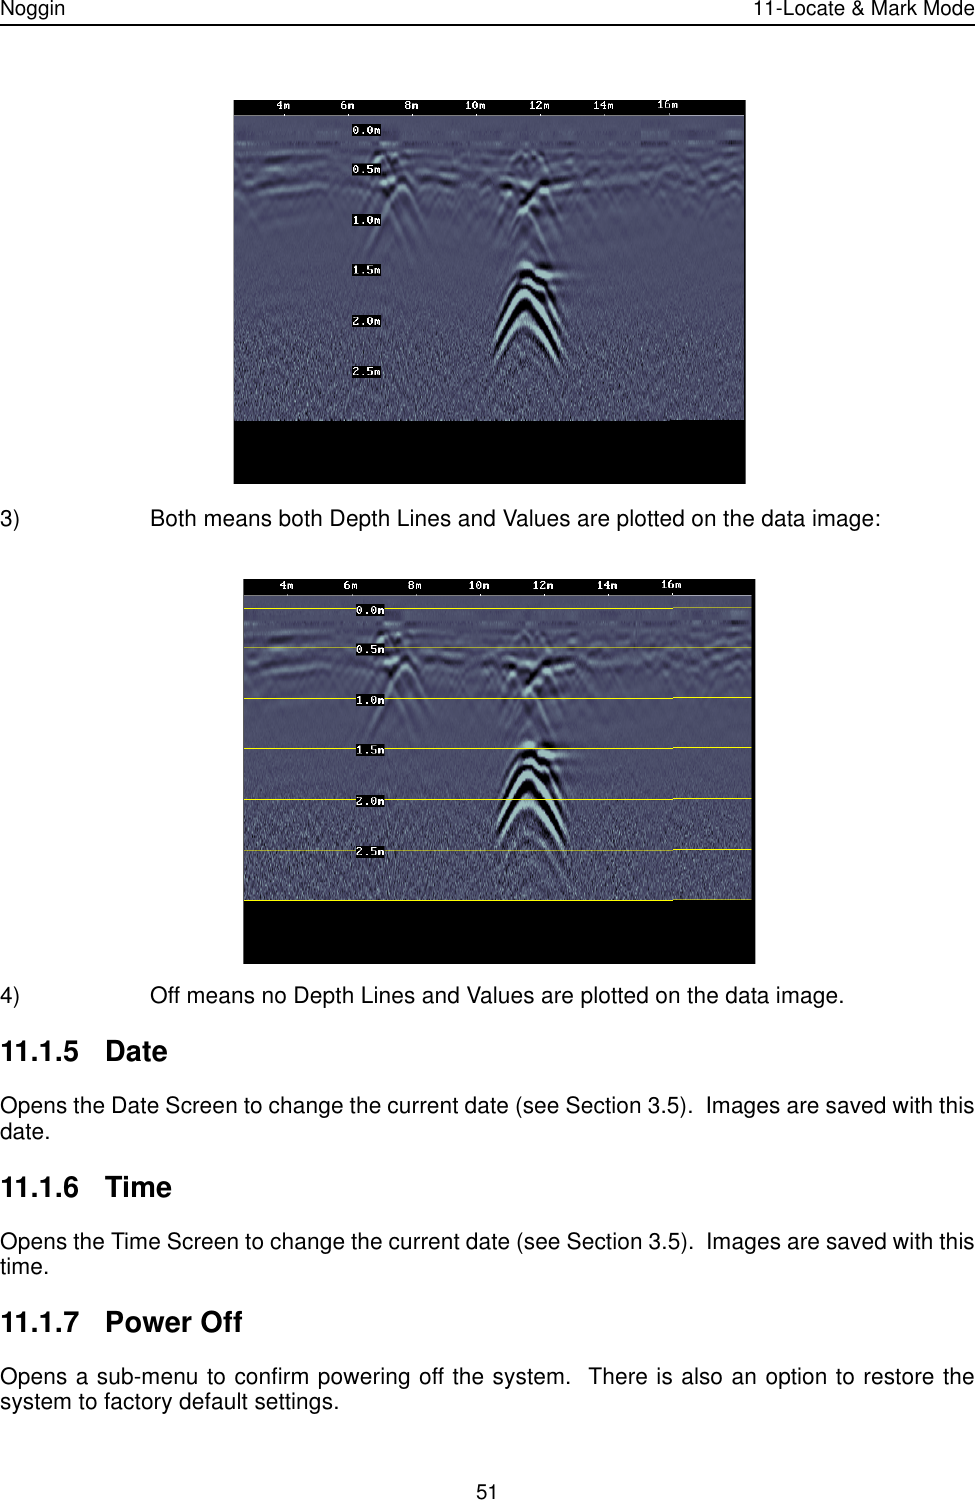 Noggin 11-Locate &amp; Mark Mode513) Both means both Depth Lines and Values are plotted on the data image:4) Off means no Depth Lines and Values are plotted on the data image.11.1.5 DateOpens the Date Screen to change the current date (see Section 3.5).  Images are saved with thisdate.11.1.6 TimeOpens the Time Screen to change the current date (see Section 3.5).  Images are saved with thistime.11.1.7 Power OffOpens a sub-menu to confirm powering off the system.  There is also an option to restore thesystem to factory default settings. 